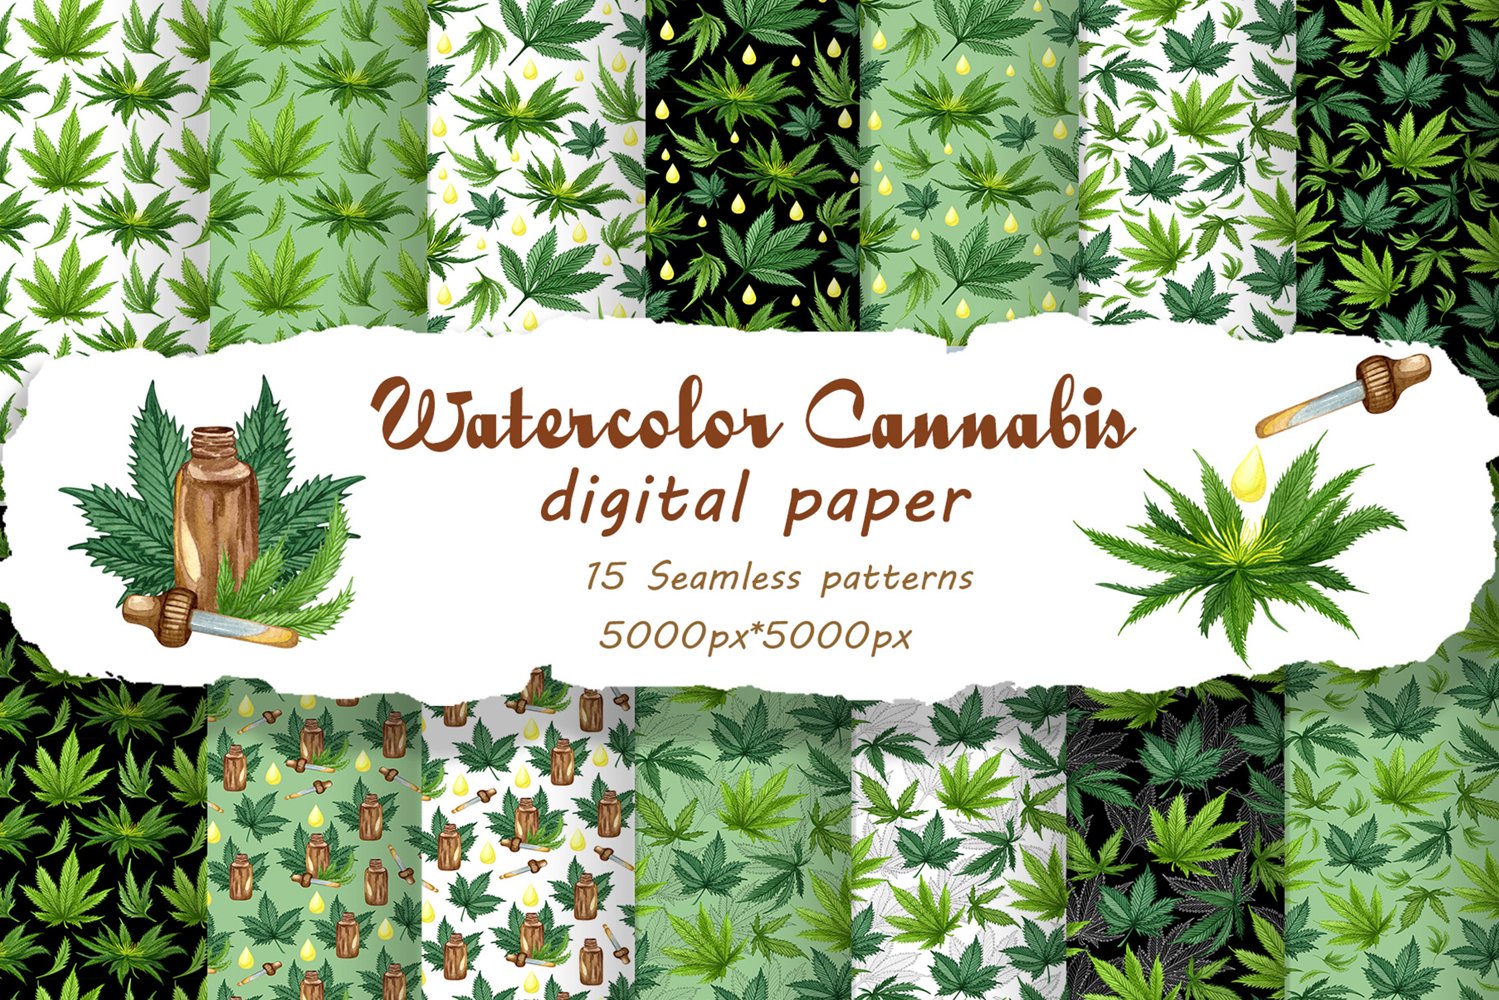 Cover image of Cannabis watercolor digital papers.